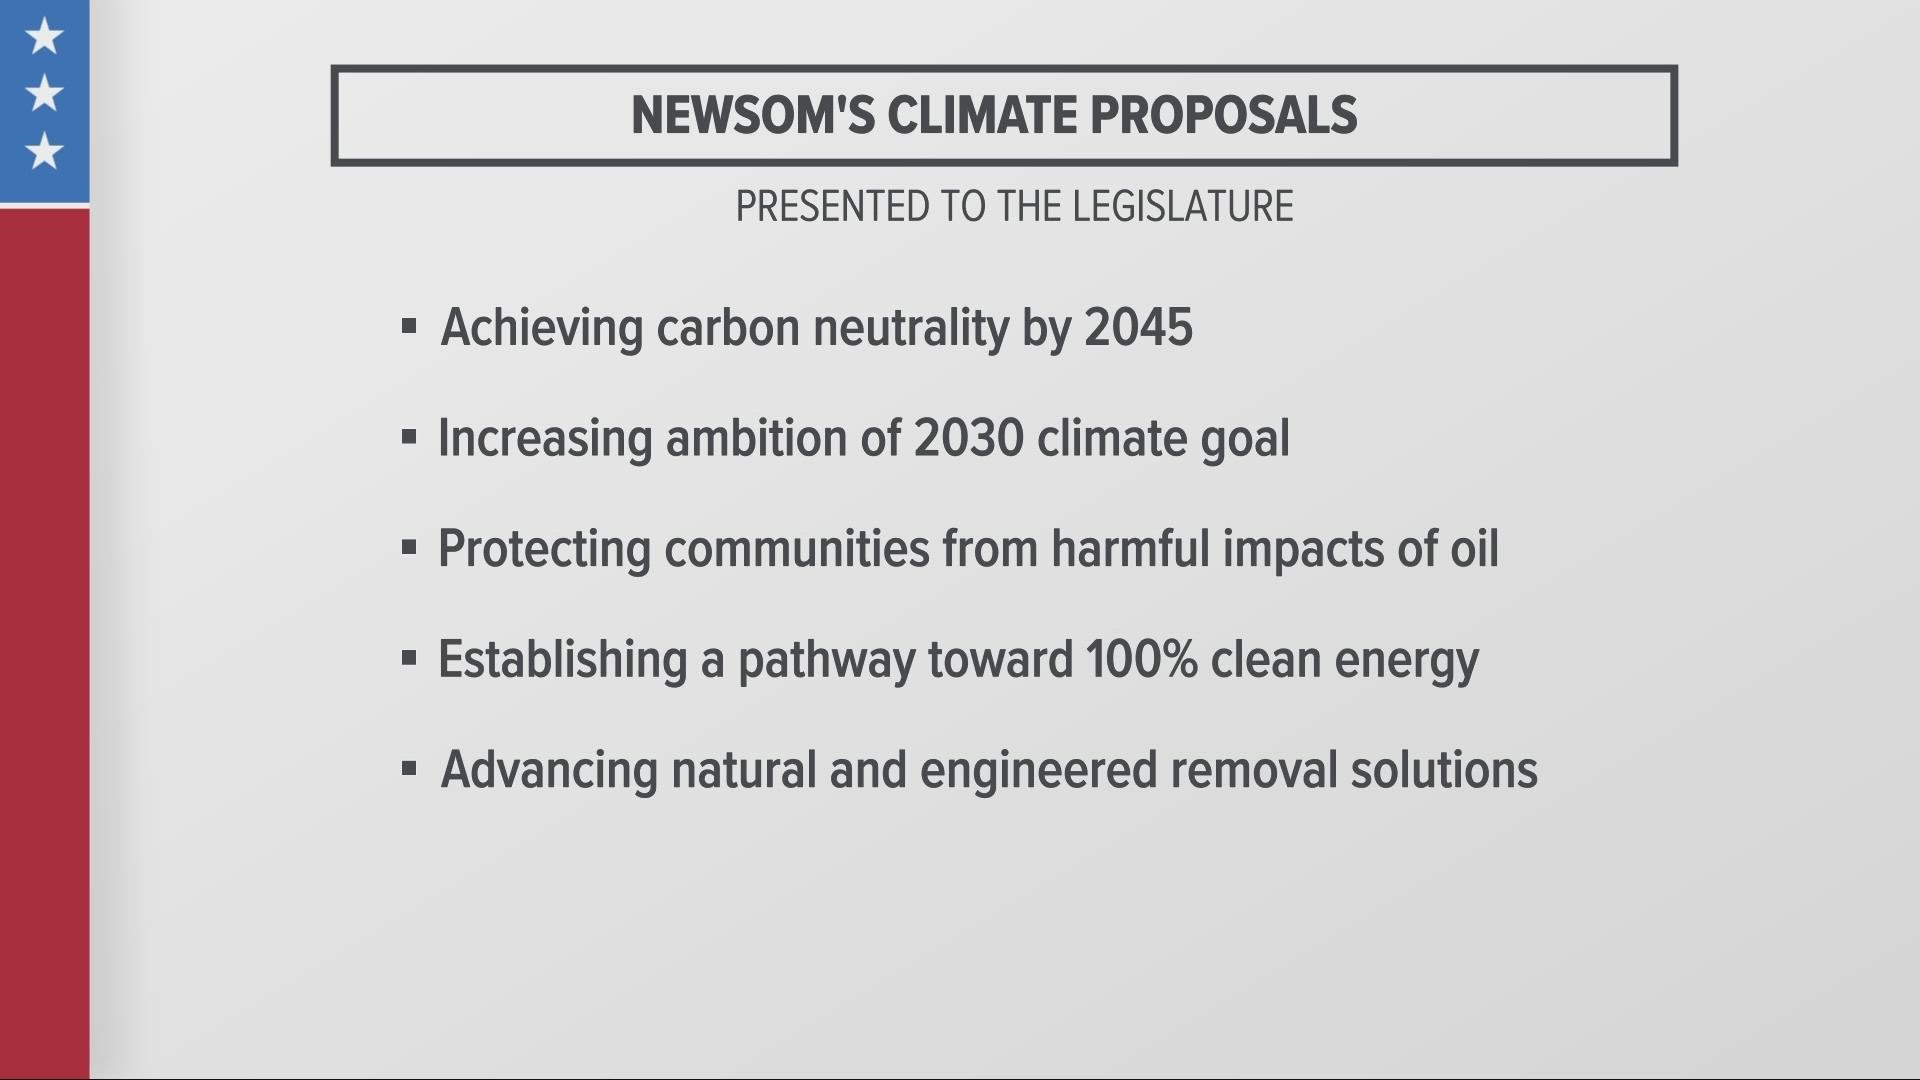 With just a few weeks left of the legislative session, Governor Gavin Newsom sent lawmakers his list of climate actions he wants them to take.